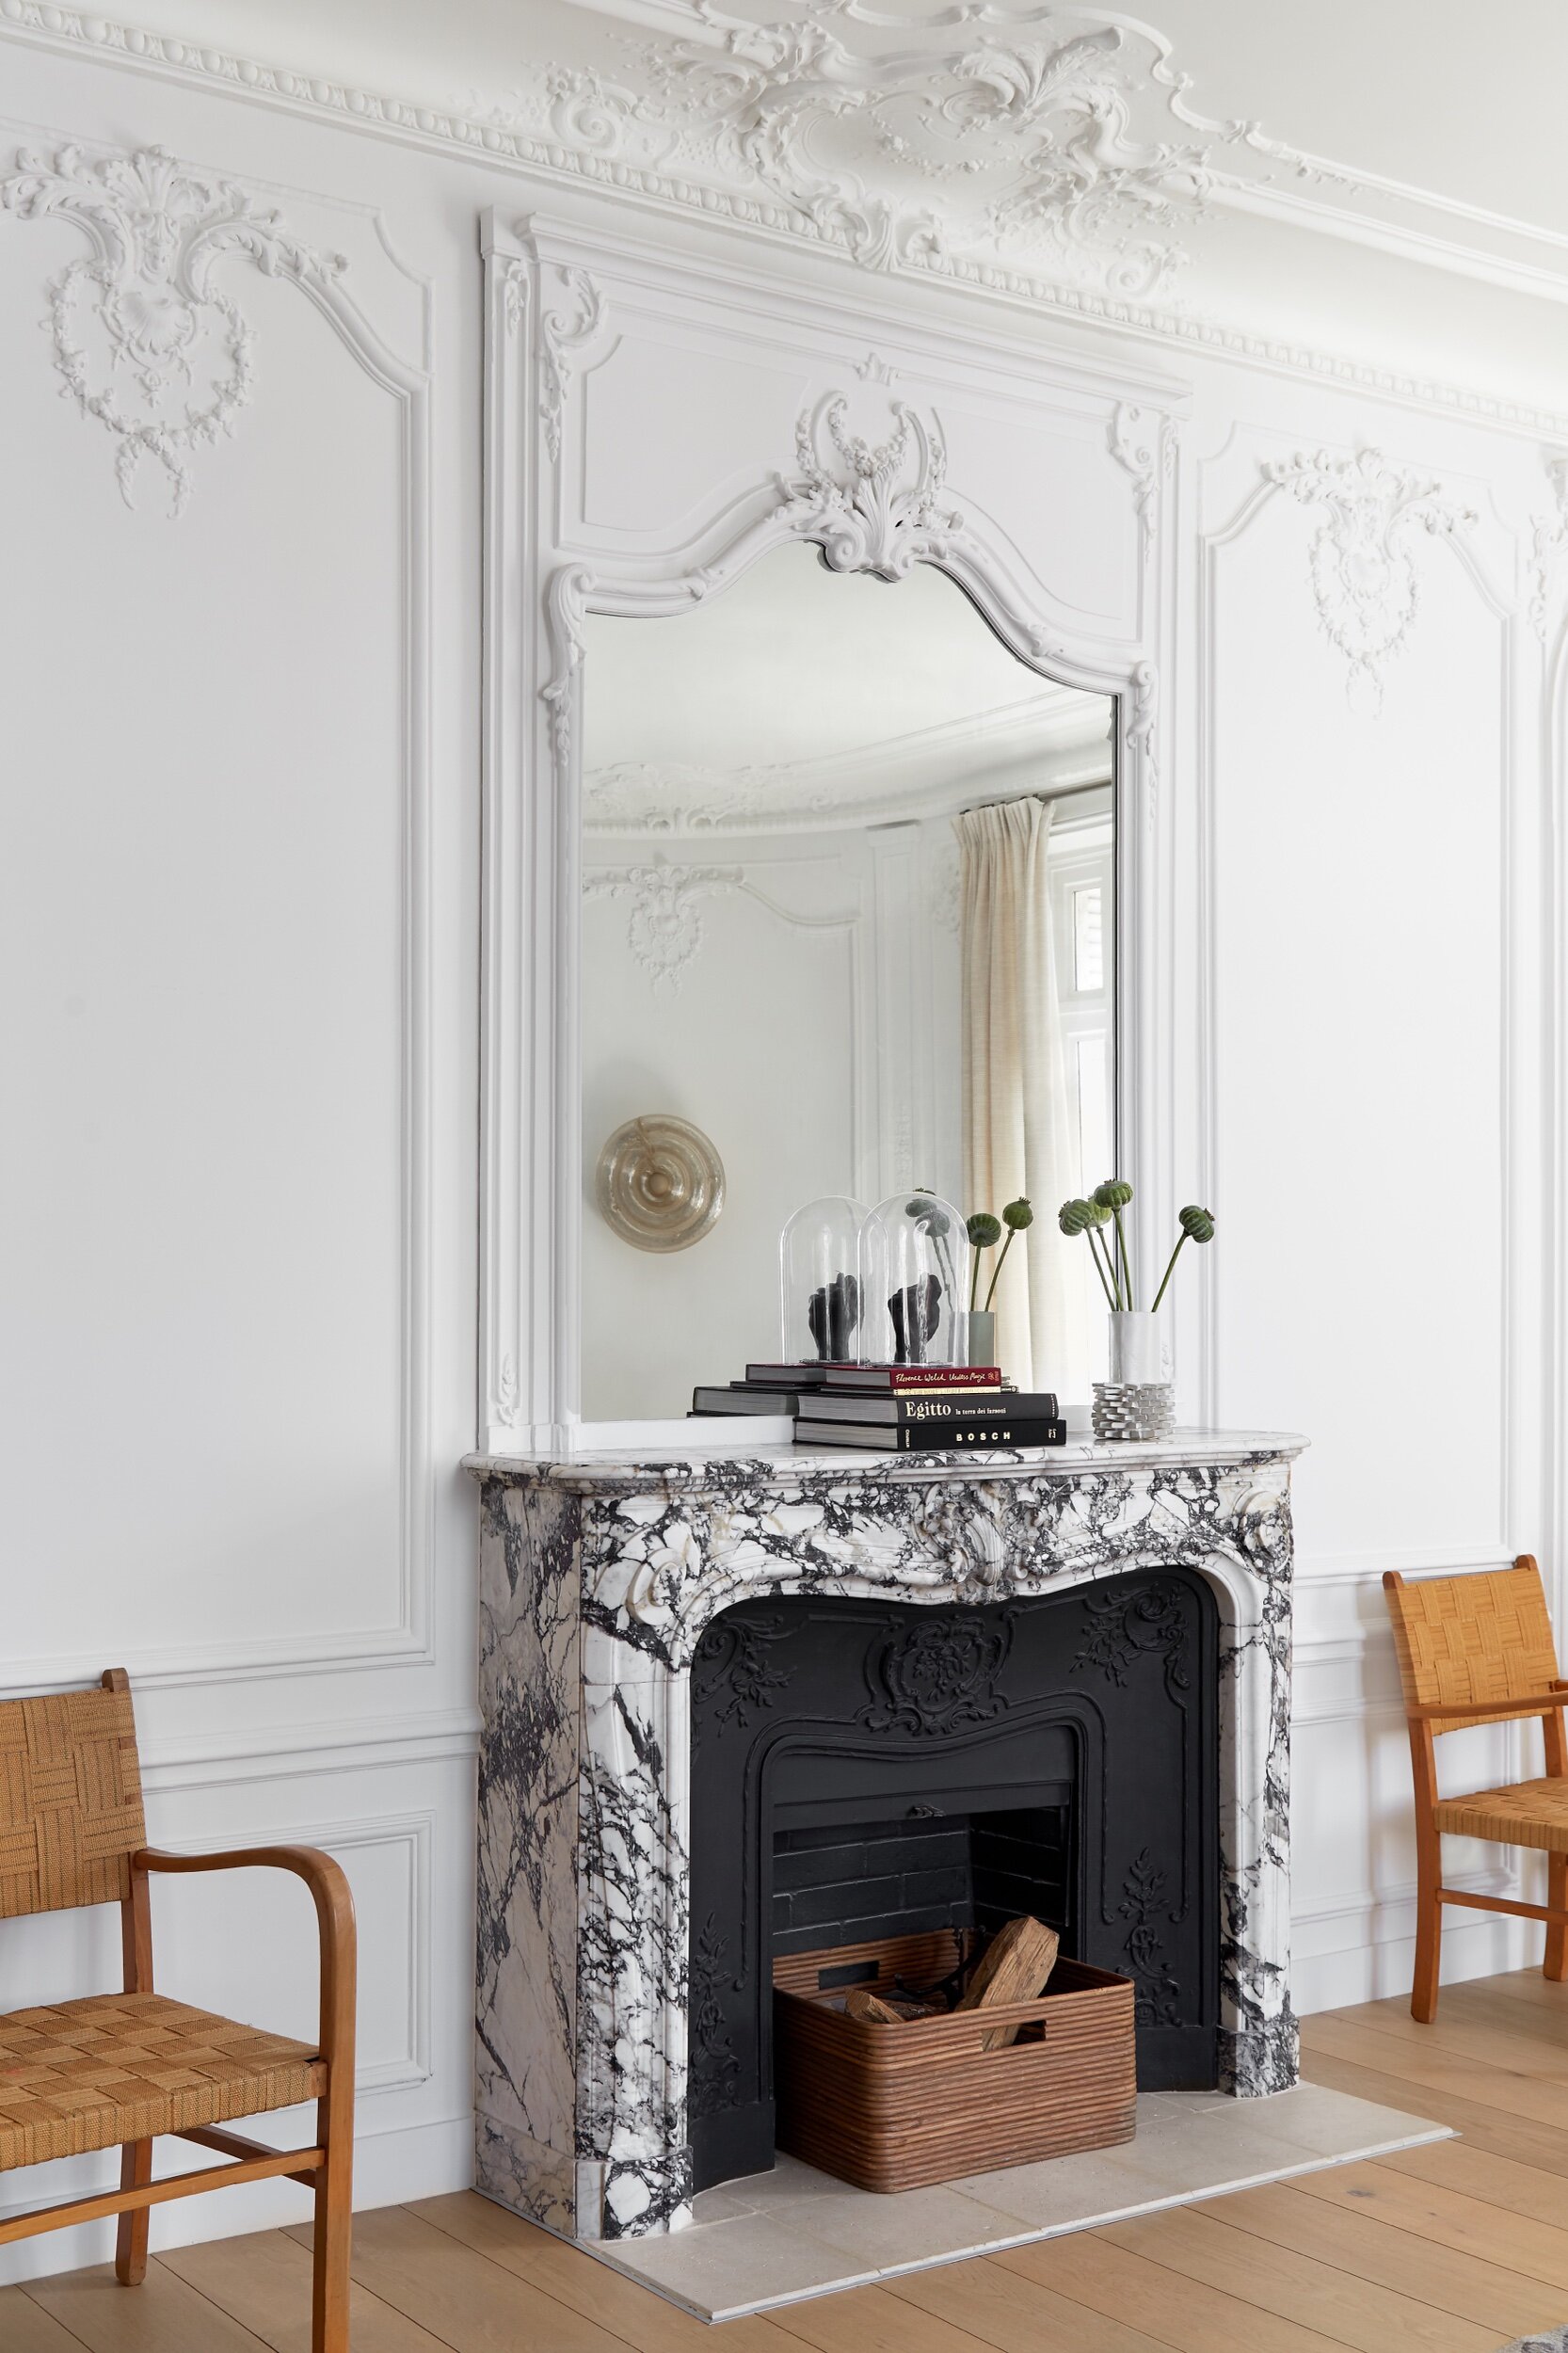 Marble fireplace in a newly renovated Parisian apartment